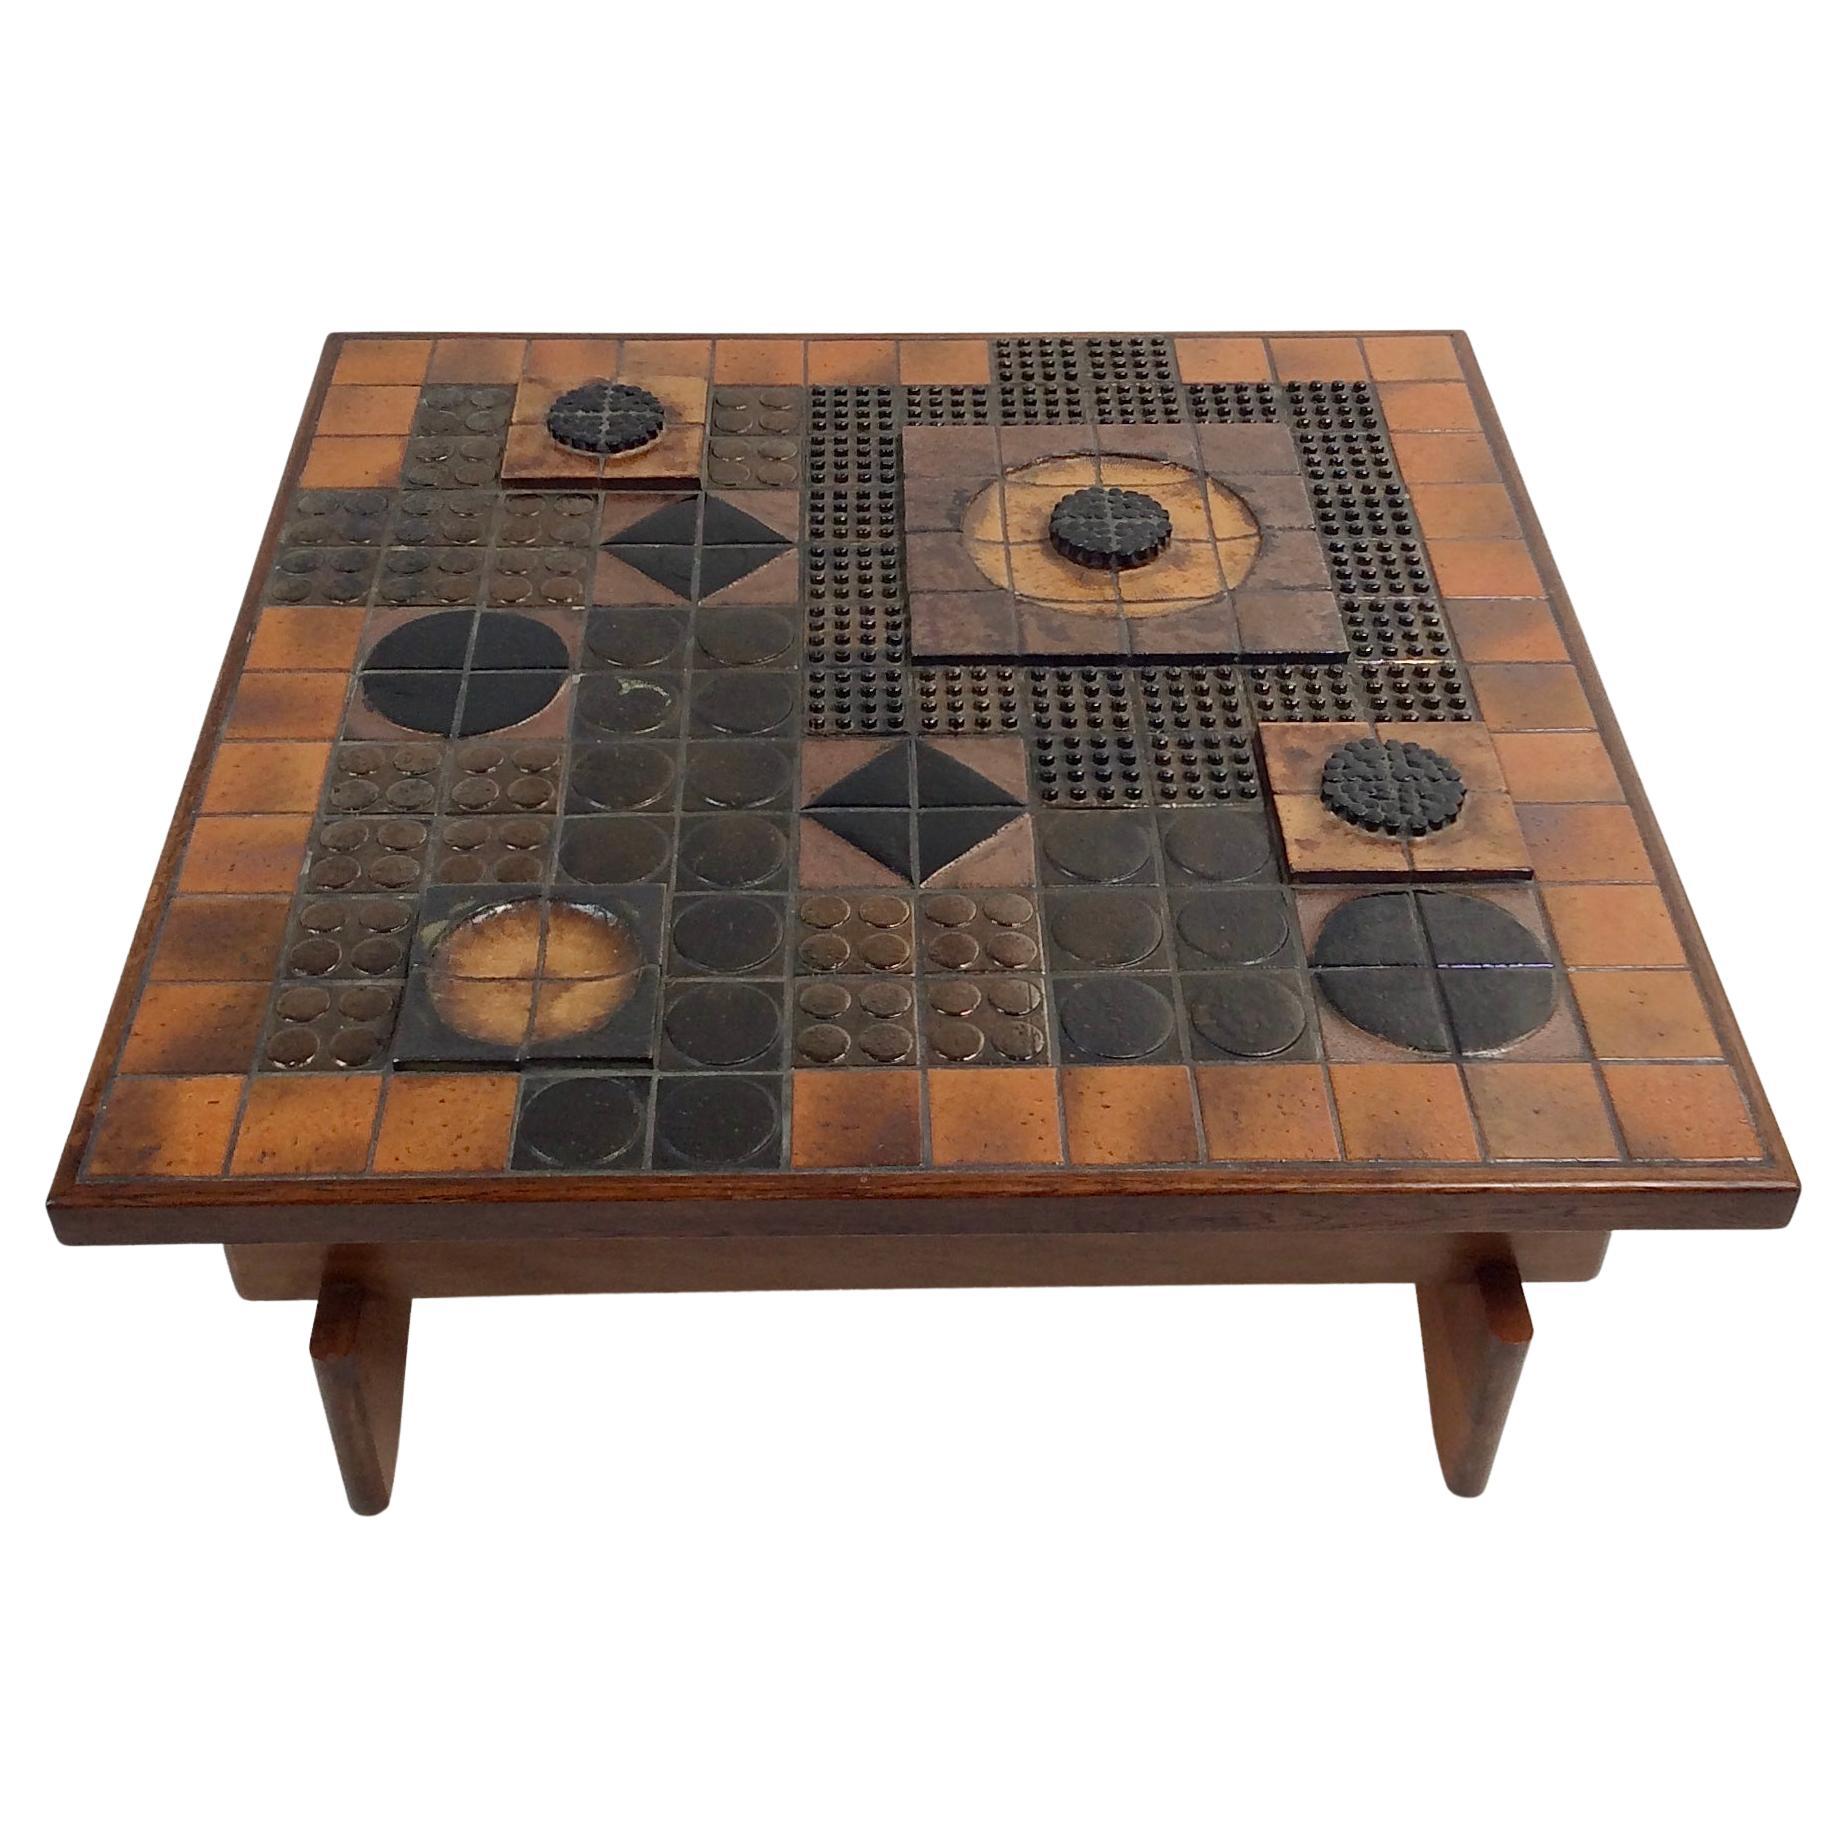 Impressive ceramic square coffee table circa 1960, France.
In the style of Roger Capron, glazed ceramic tiles in shades of tan, yellow, black, orange, brown.
A succession of recessed and protruding ceramic parts intensifies the effect of